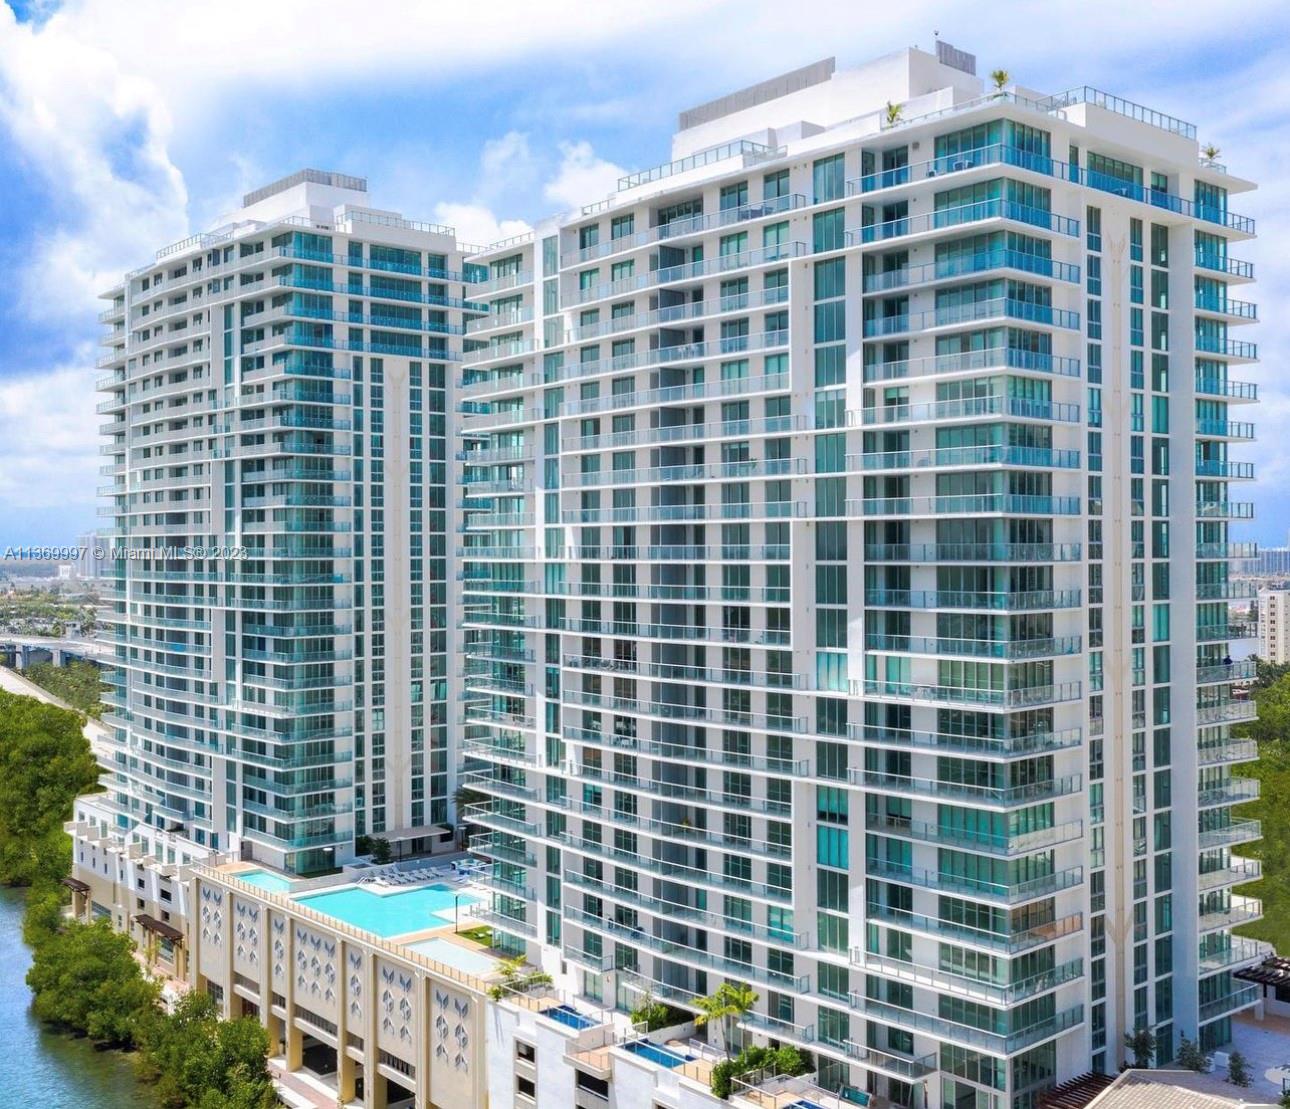 LUXURY APT ON THE BAY AT SUNNY ISLES BEACH,3BED.3.5BATH.ALL FURNISHED.STAIN STEEL APPLIANCES,GREAT AMENITIES, POOL,SPA,GYM,CONCIERGE SERVICES,KIDS ROOM.AVAILABLE ONLY FOR 6 MONTHS OR LESS. CONSULT PRICE .UNIT RENTED UNTIL MIDDLE OF MARCH 2024